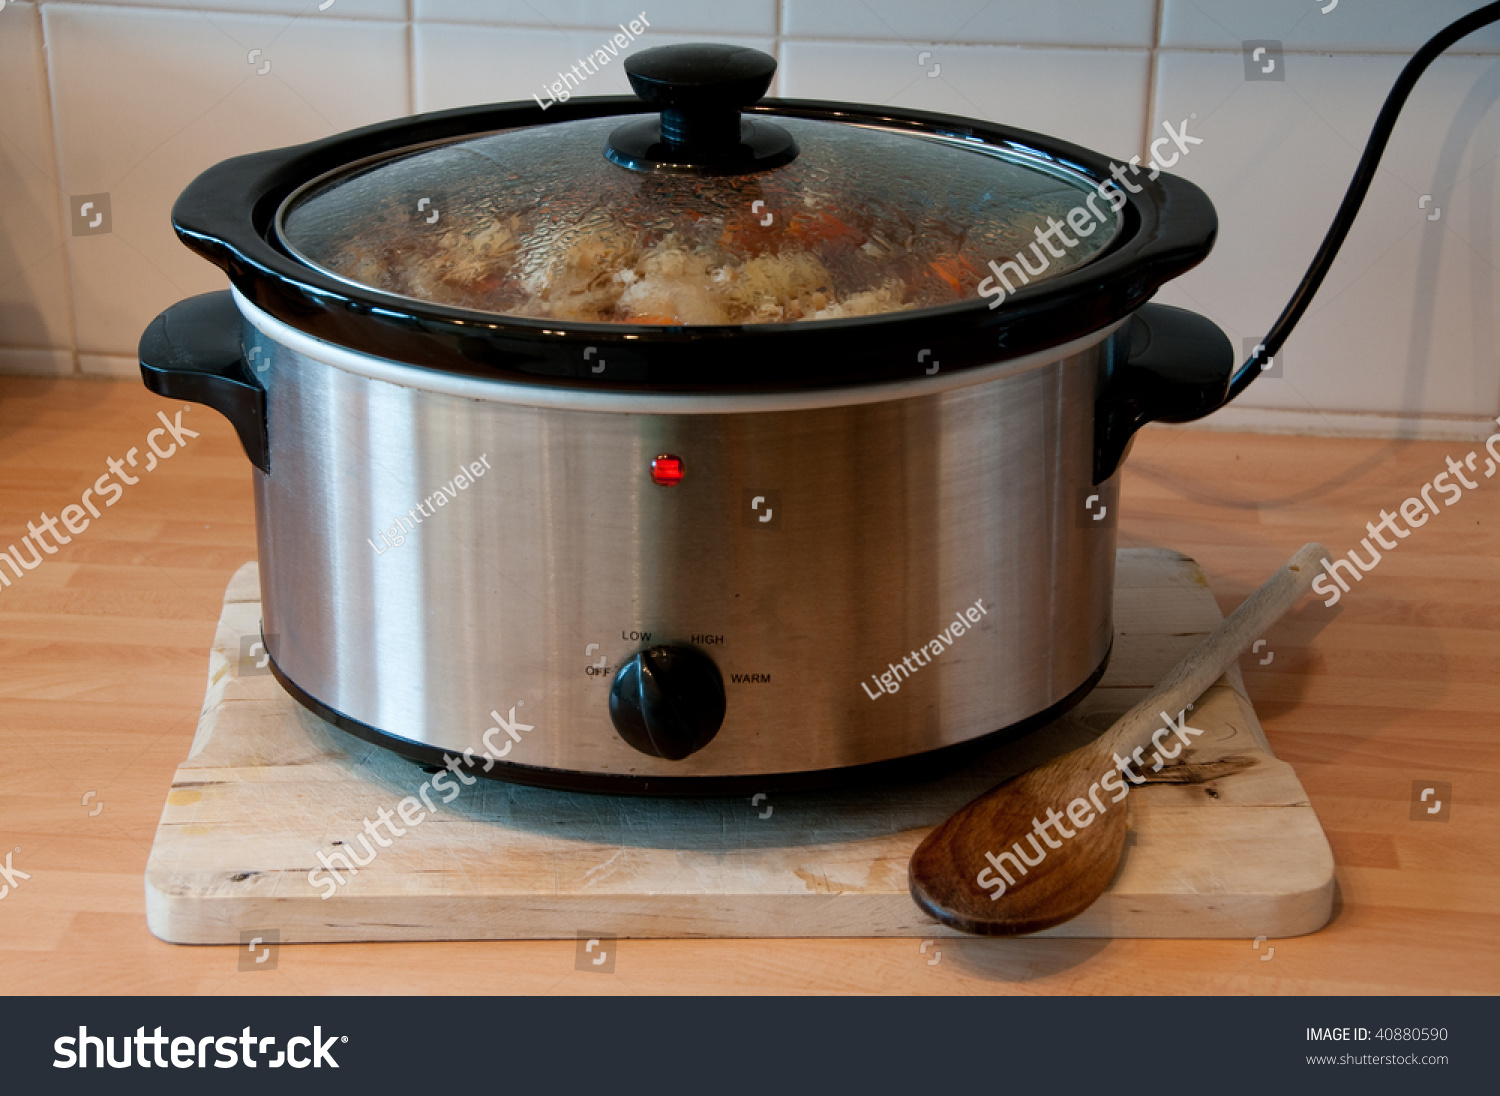 Slow cooker with wooden spoon on chopping board cheep winter cooking #40880590